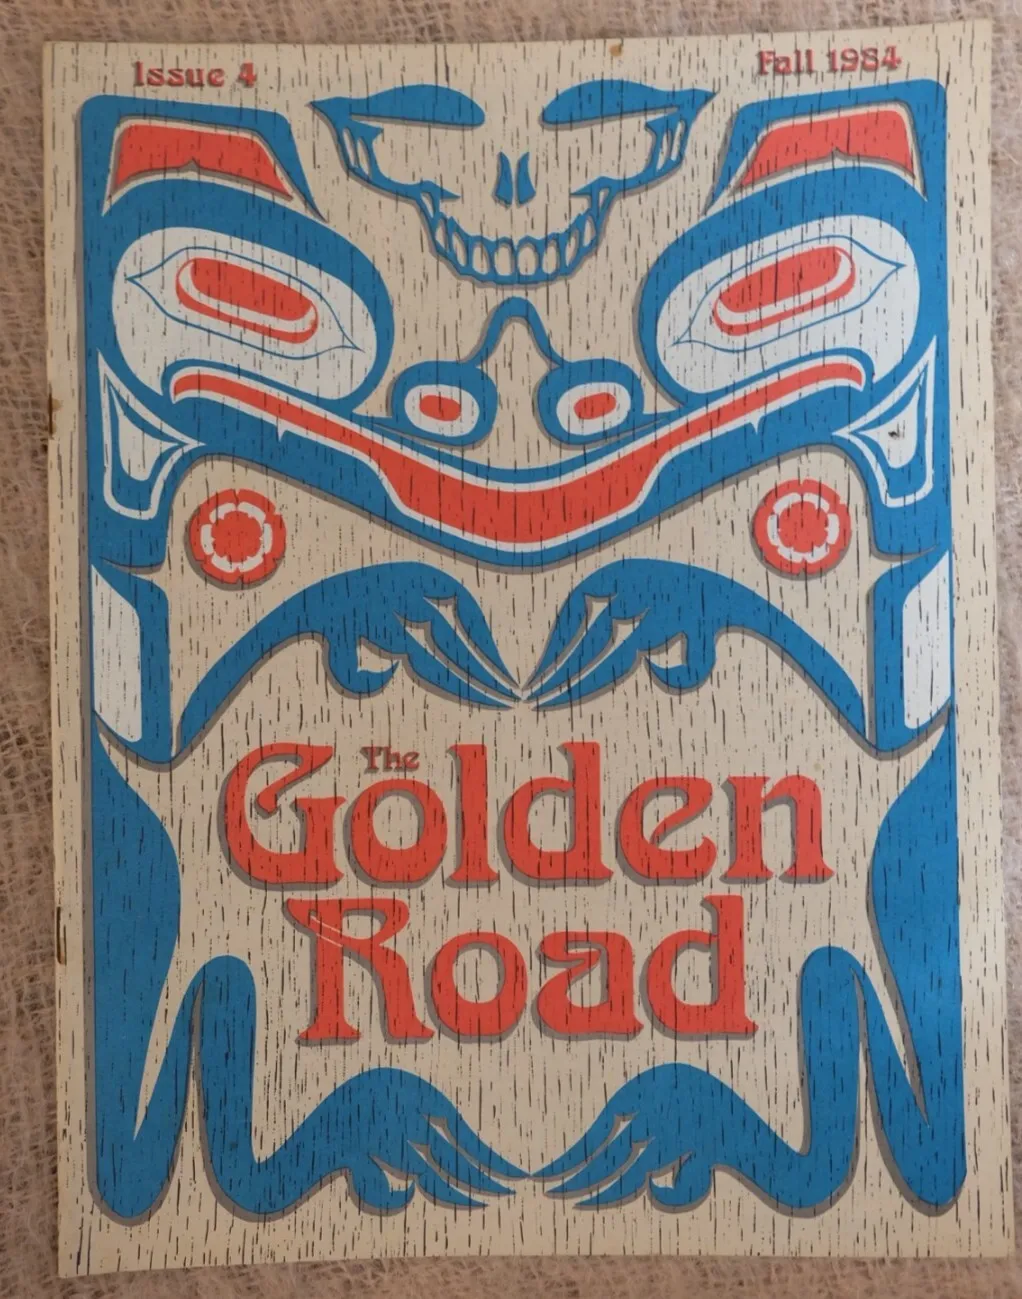 Grateful Dead The Golden Road Magazine Issue 4 Fall 1984 Vintage Collectable